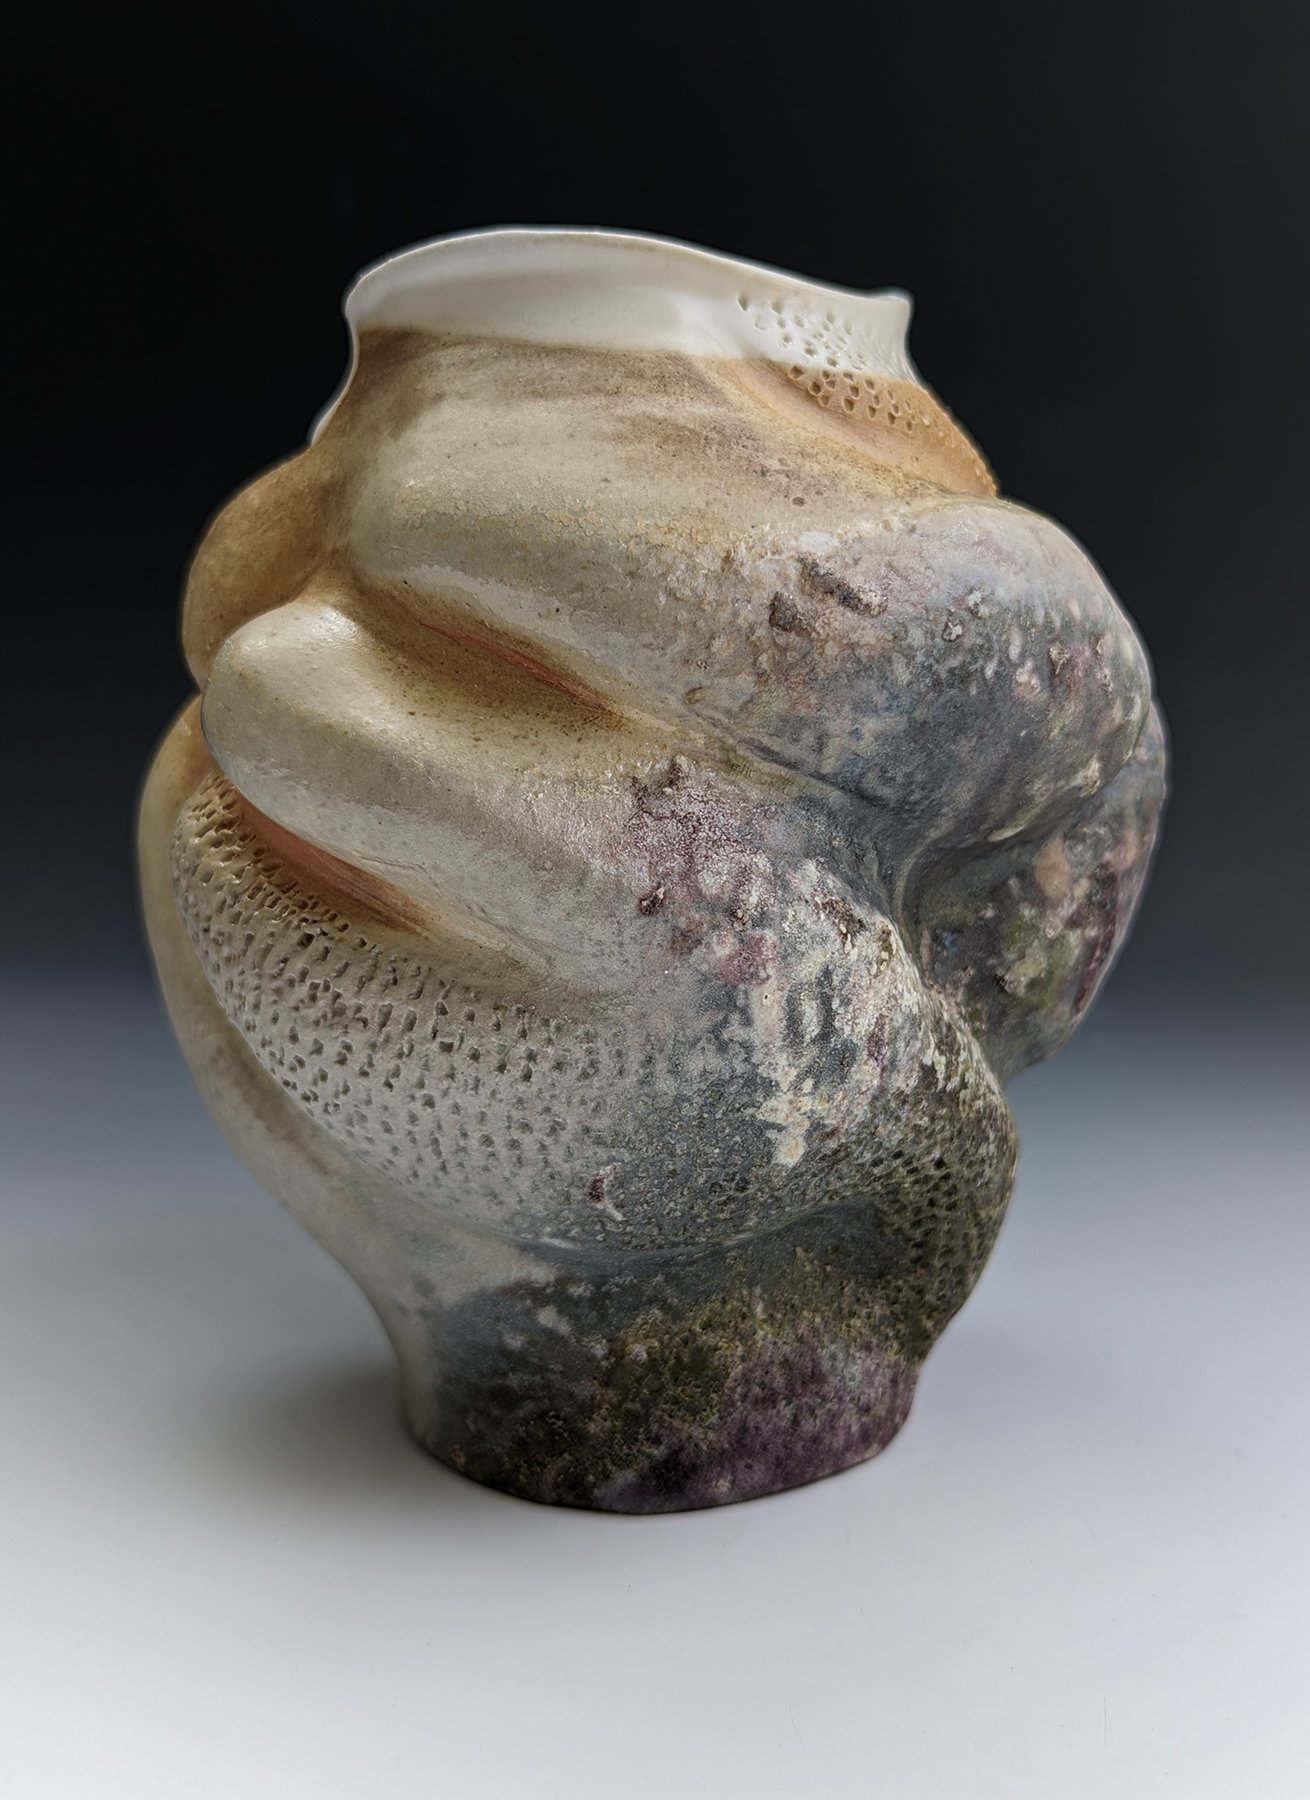    Reef Vase ,   wood-fired ceramics, 7 x 5 x 4 inches 